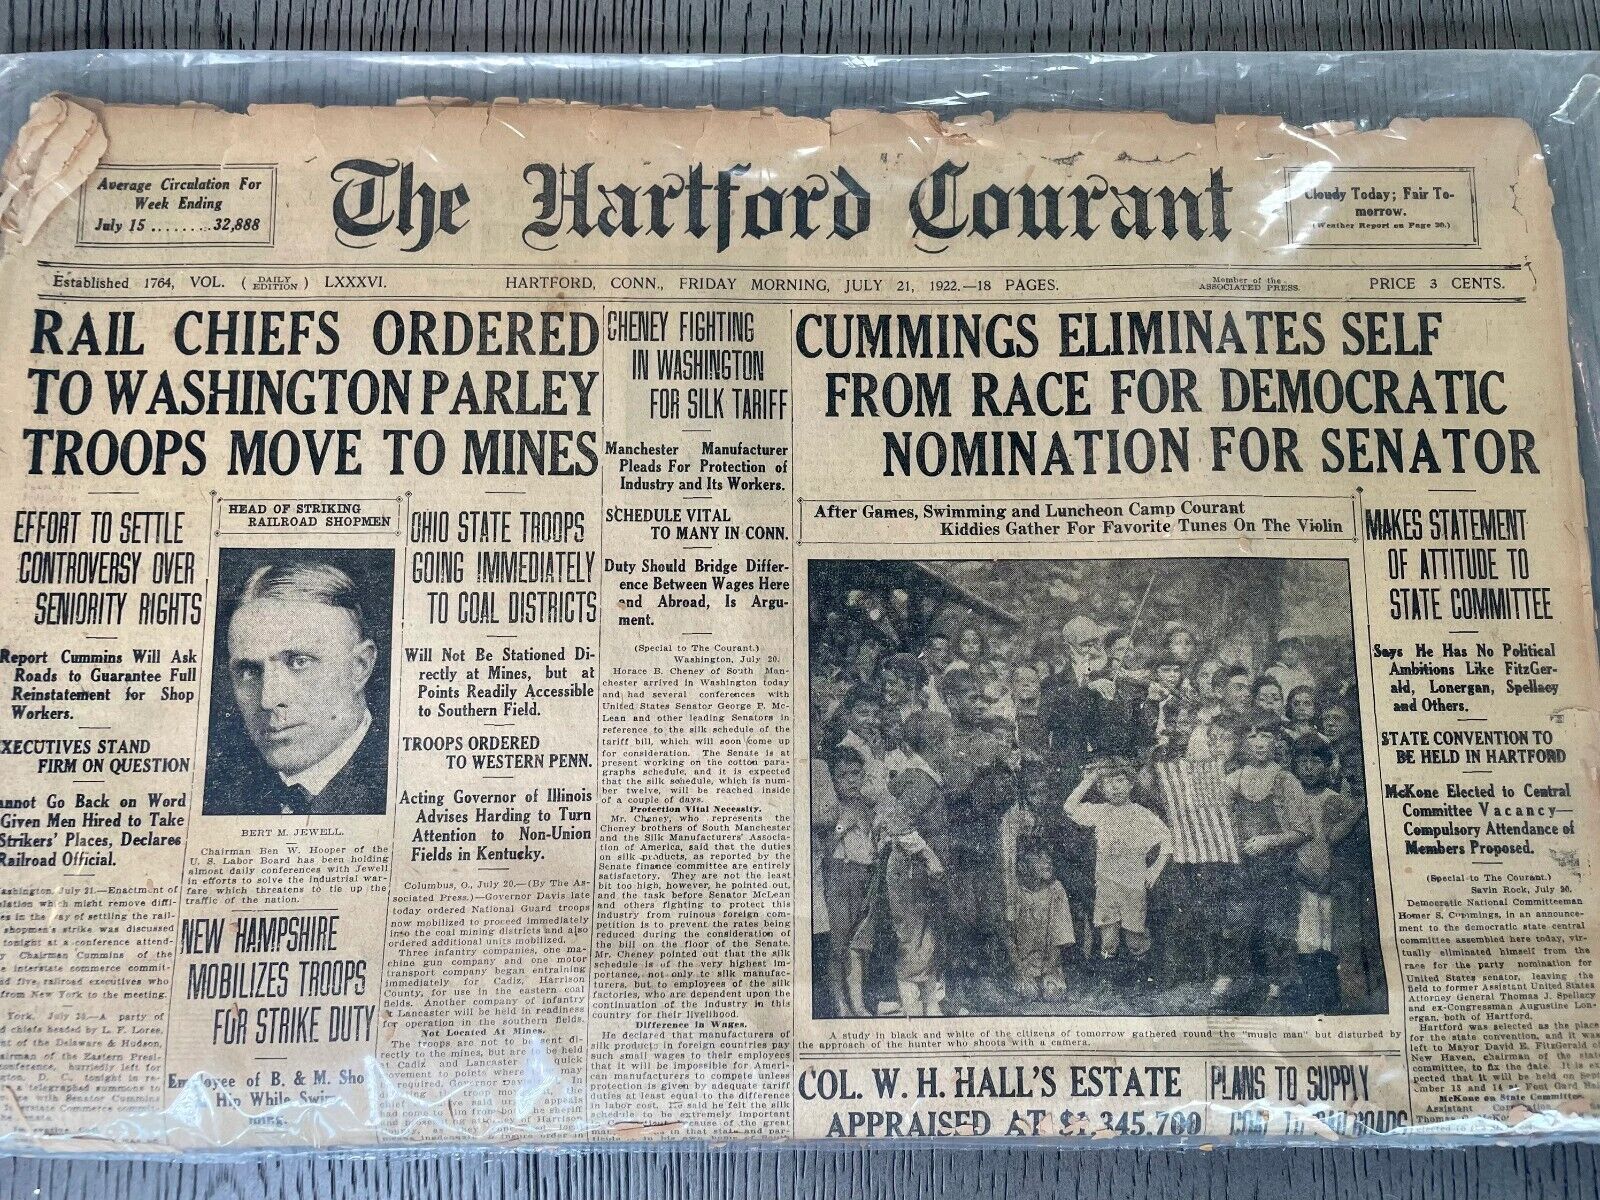 The Hartford Courant Antique 1922 Newspaper with Certificate of Authenticity